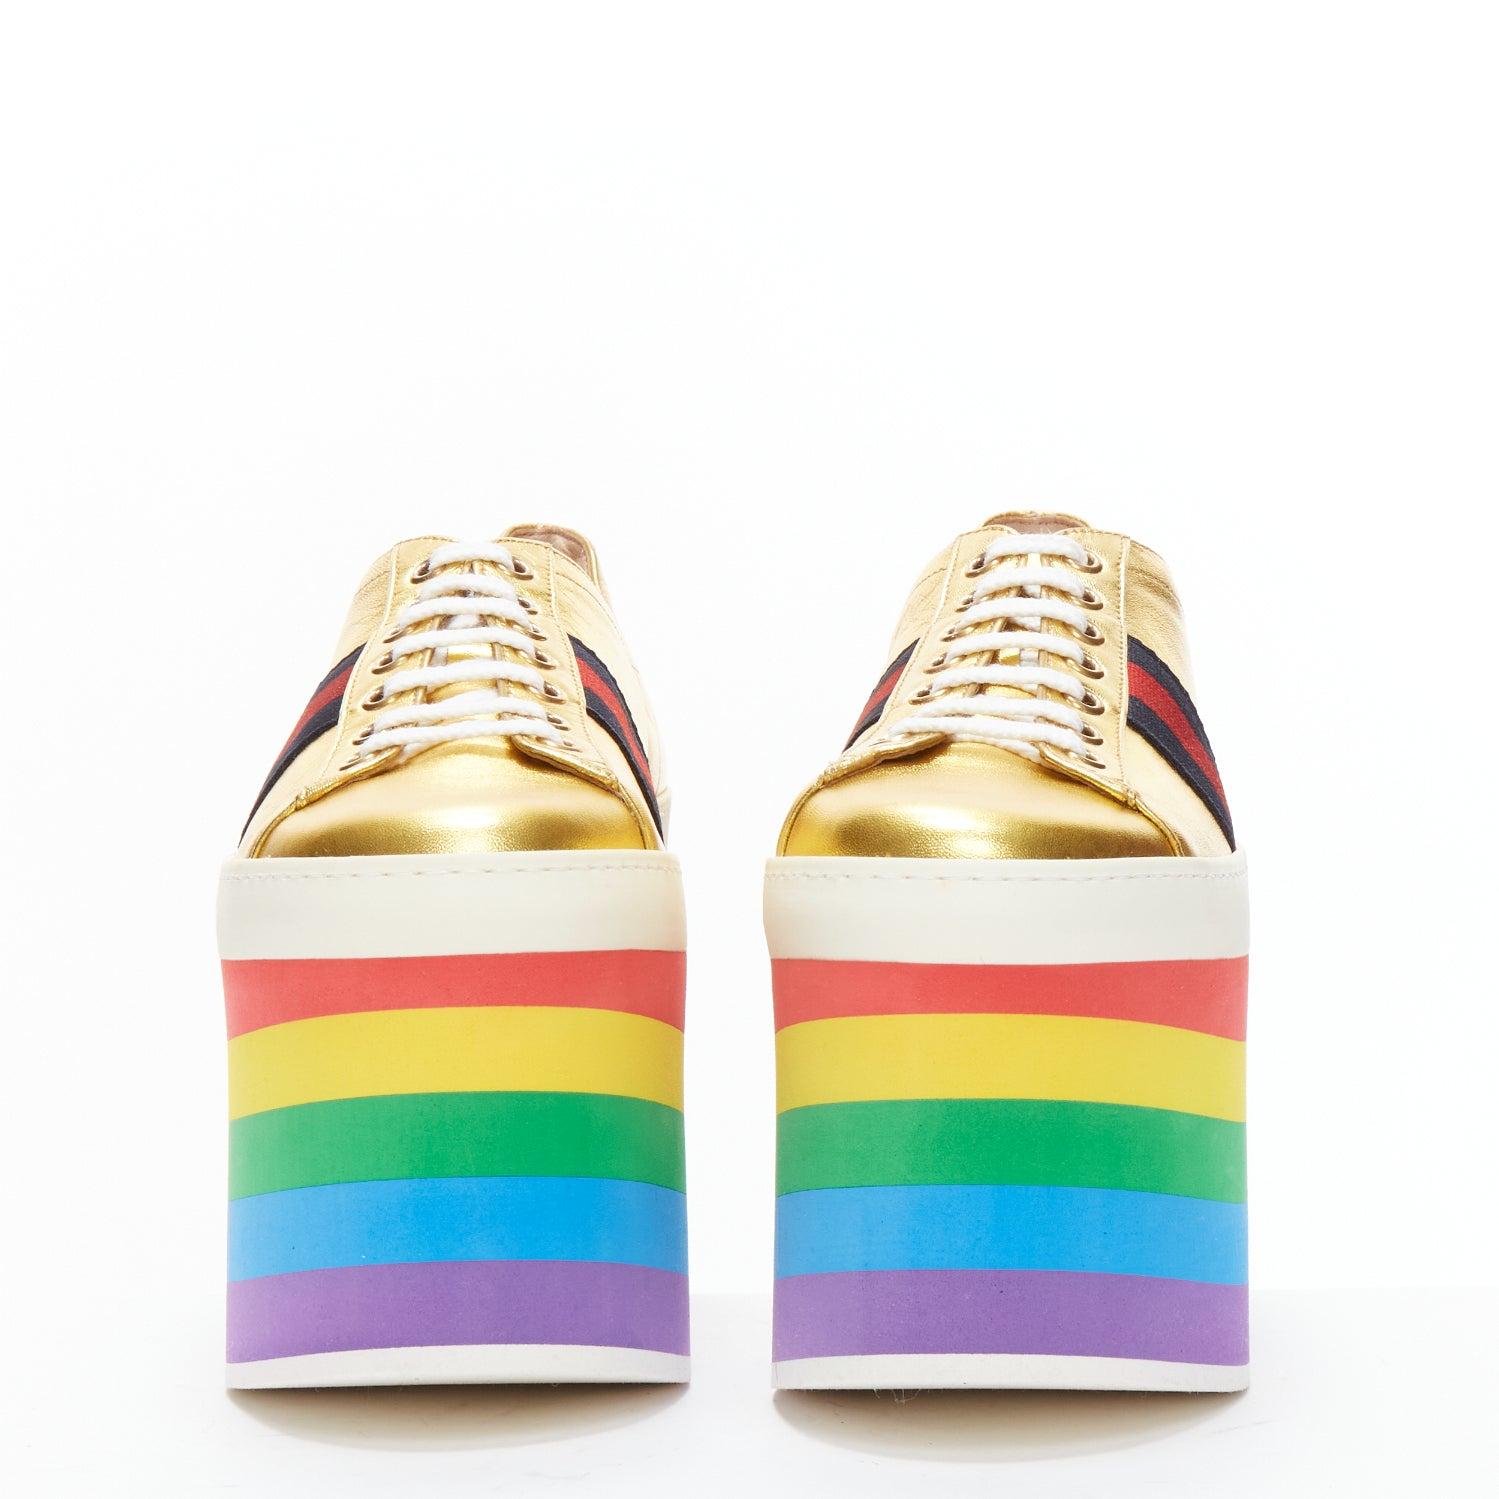 Gold GUCCI Alessandro Michele Peggy rainbow gold web platform sneakers EU37.5 For Sale